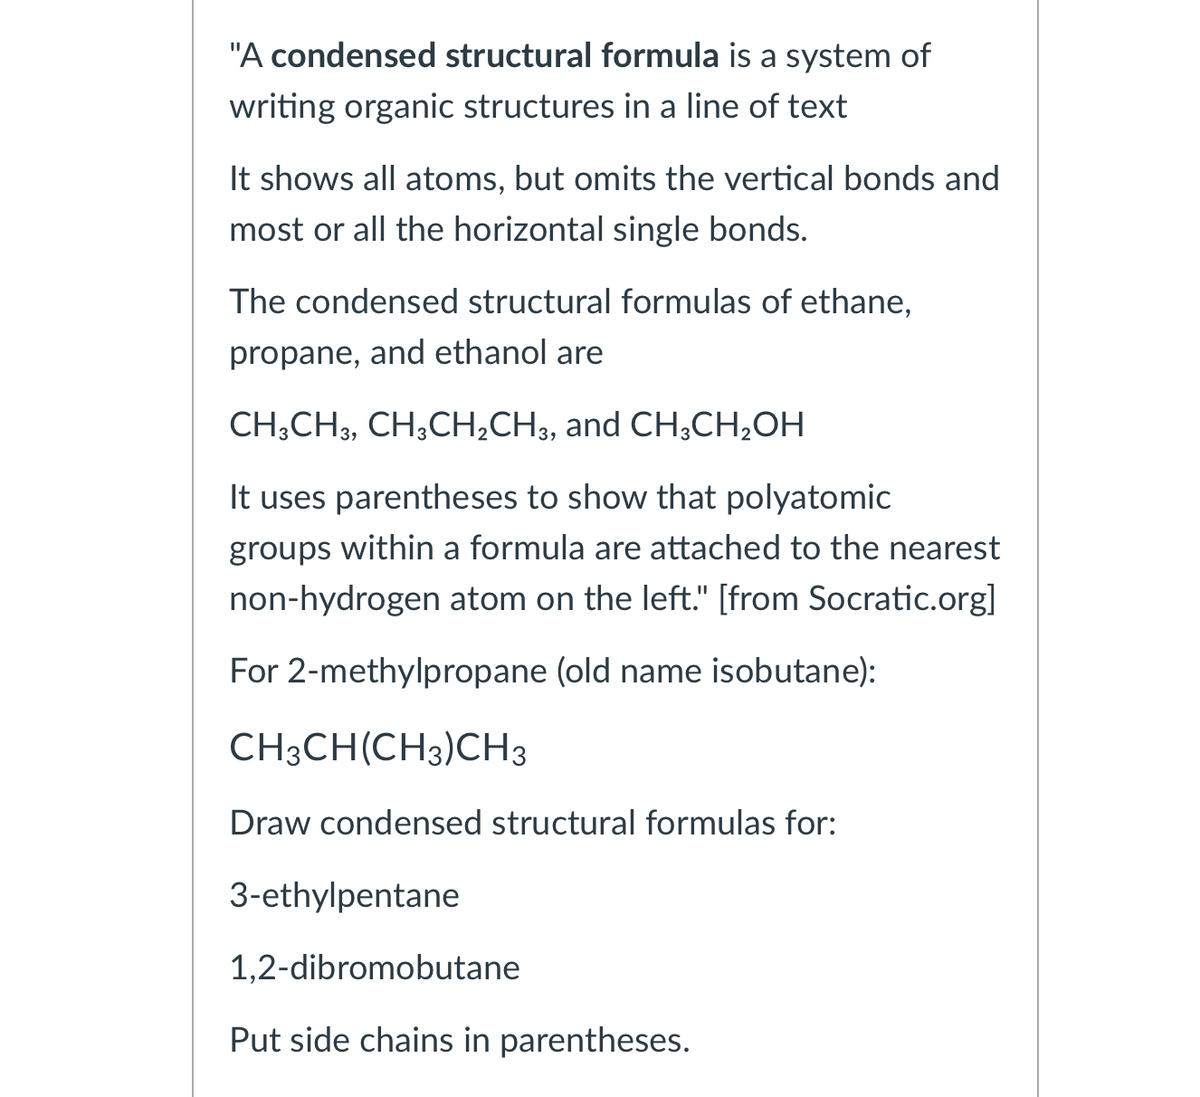 "A condensed structural formula is a system of
writing organic structures in a line of text
It shows all atoms, but omits the vertical bonds and
most or all the horizontal single bonds.
The condensed structural formulas of ethane,
propane, and ethanol are
CH;CH3, CH;CH;CH3, and CH3CH;OH
It uses parentheses to show that polyatomic
groups within a formula are attached to the nearest
non-hydrogen atom on the left." [from Socratic.org]
For 2-methylpropane (old name isobutane):
CH3CH(CH3)CH3
Draw condensed structural formulas for:
3-ethylpentane
1,2-dibromobutane
Put side chains in parentheses.
